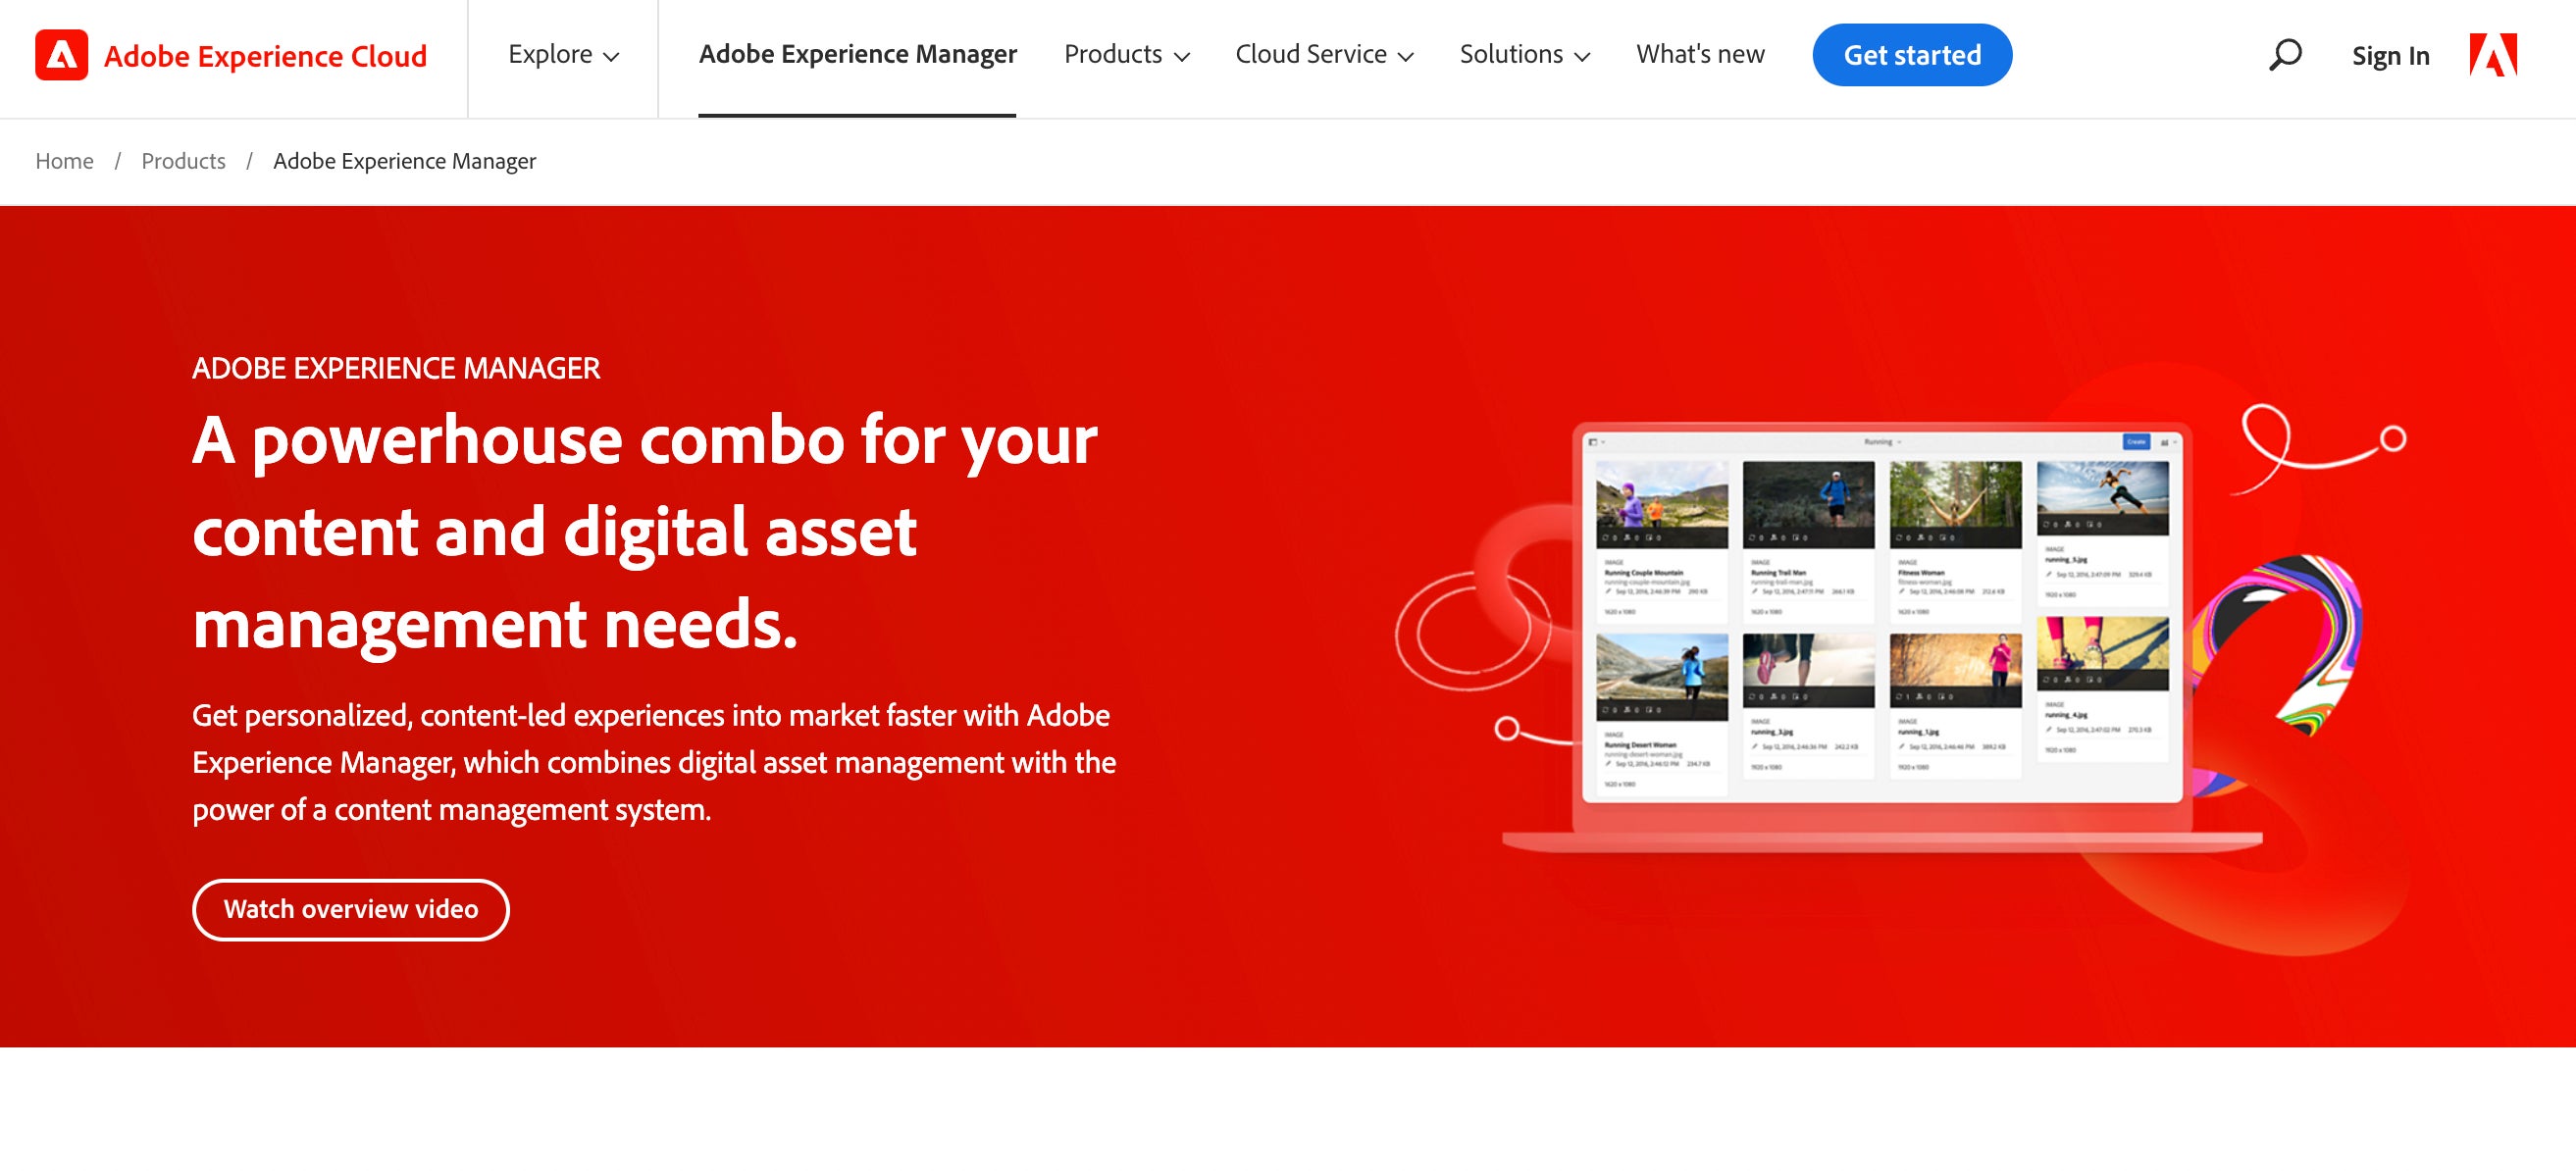 Adobe Experience Manager homepage